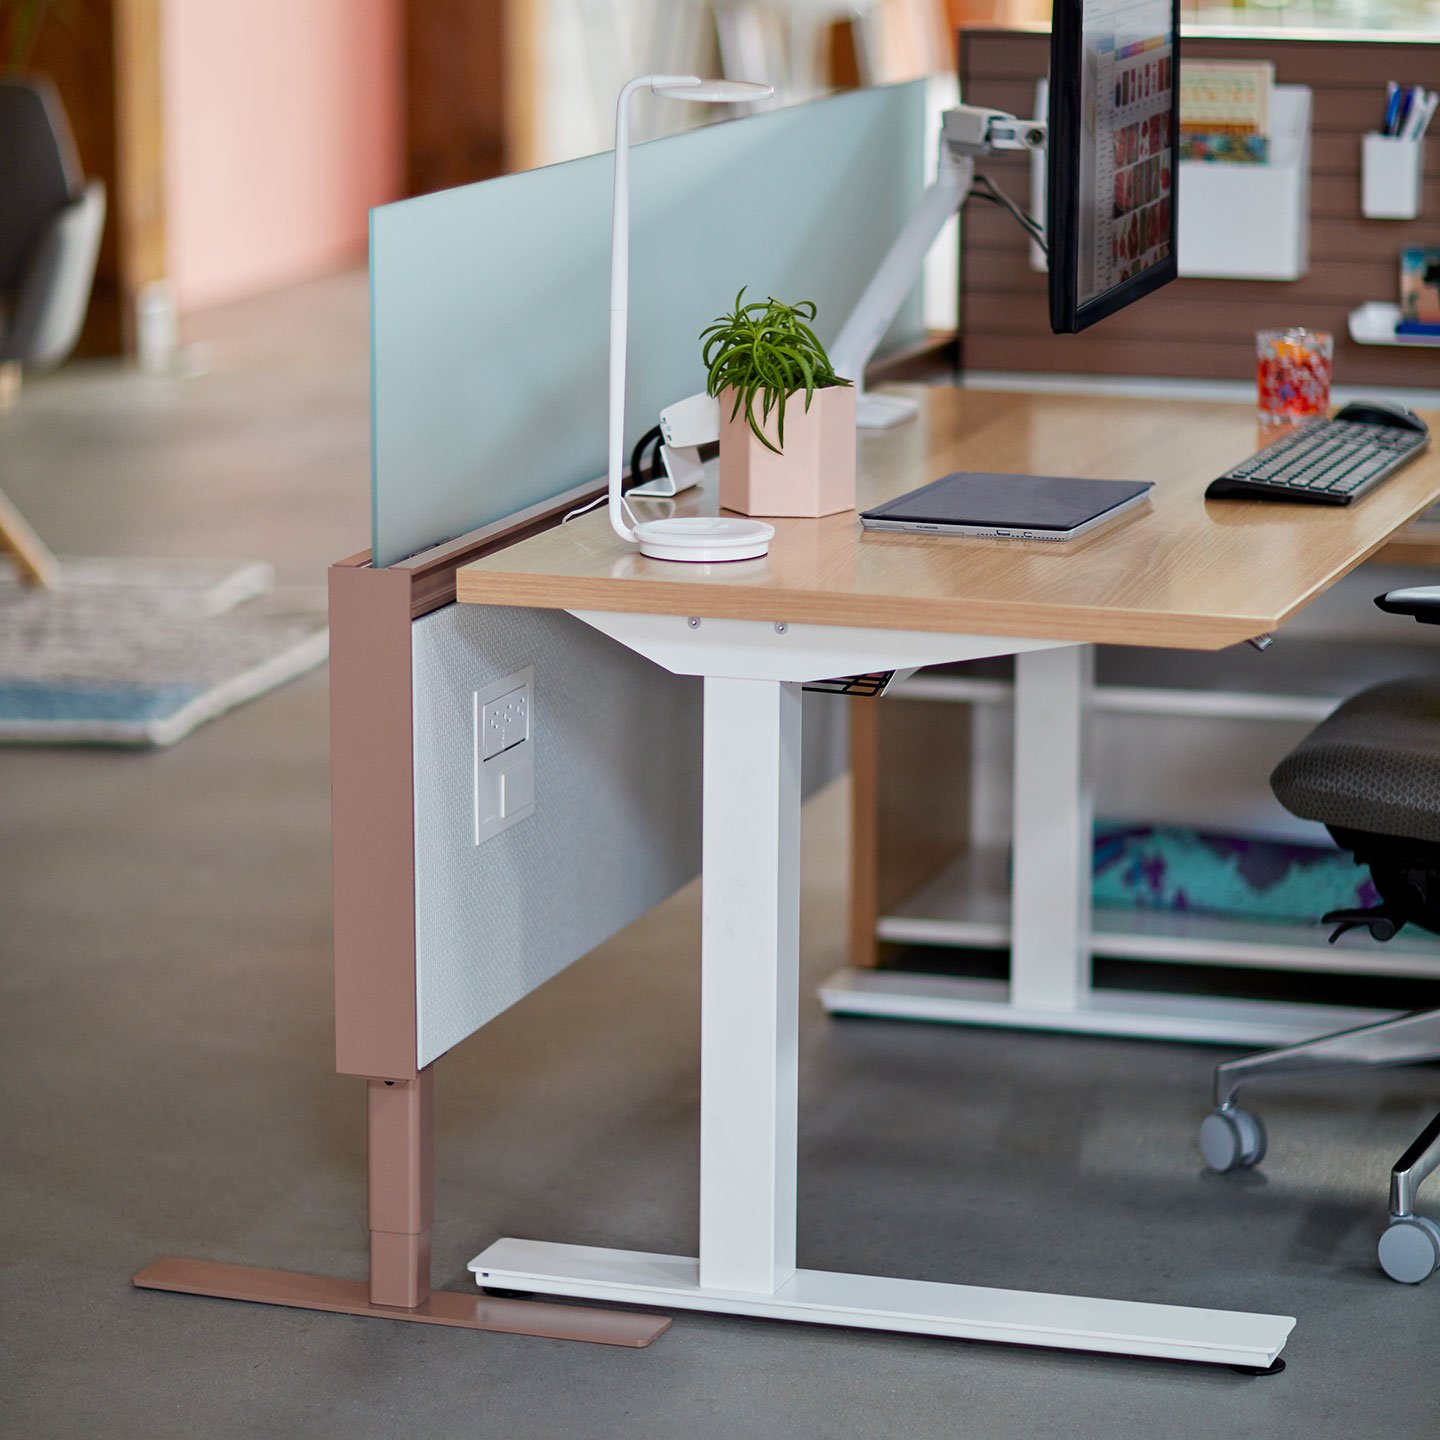 Haworth Compose Connections workspace divider in office space with height adjustable table and monitor arm